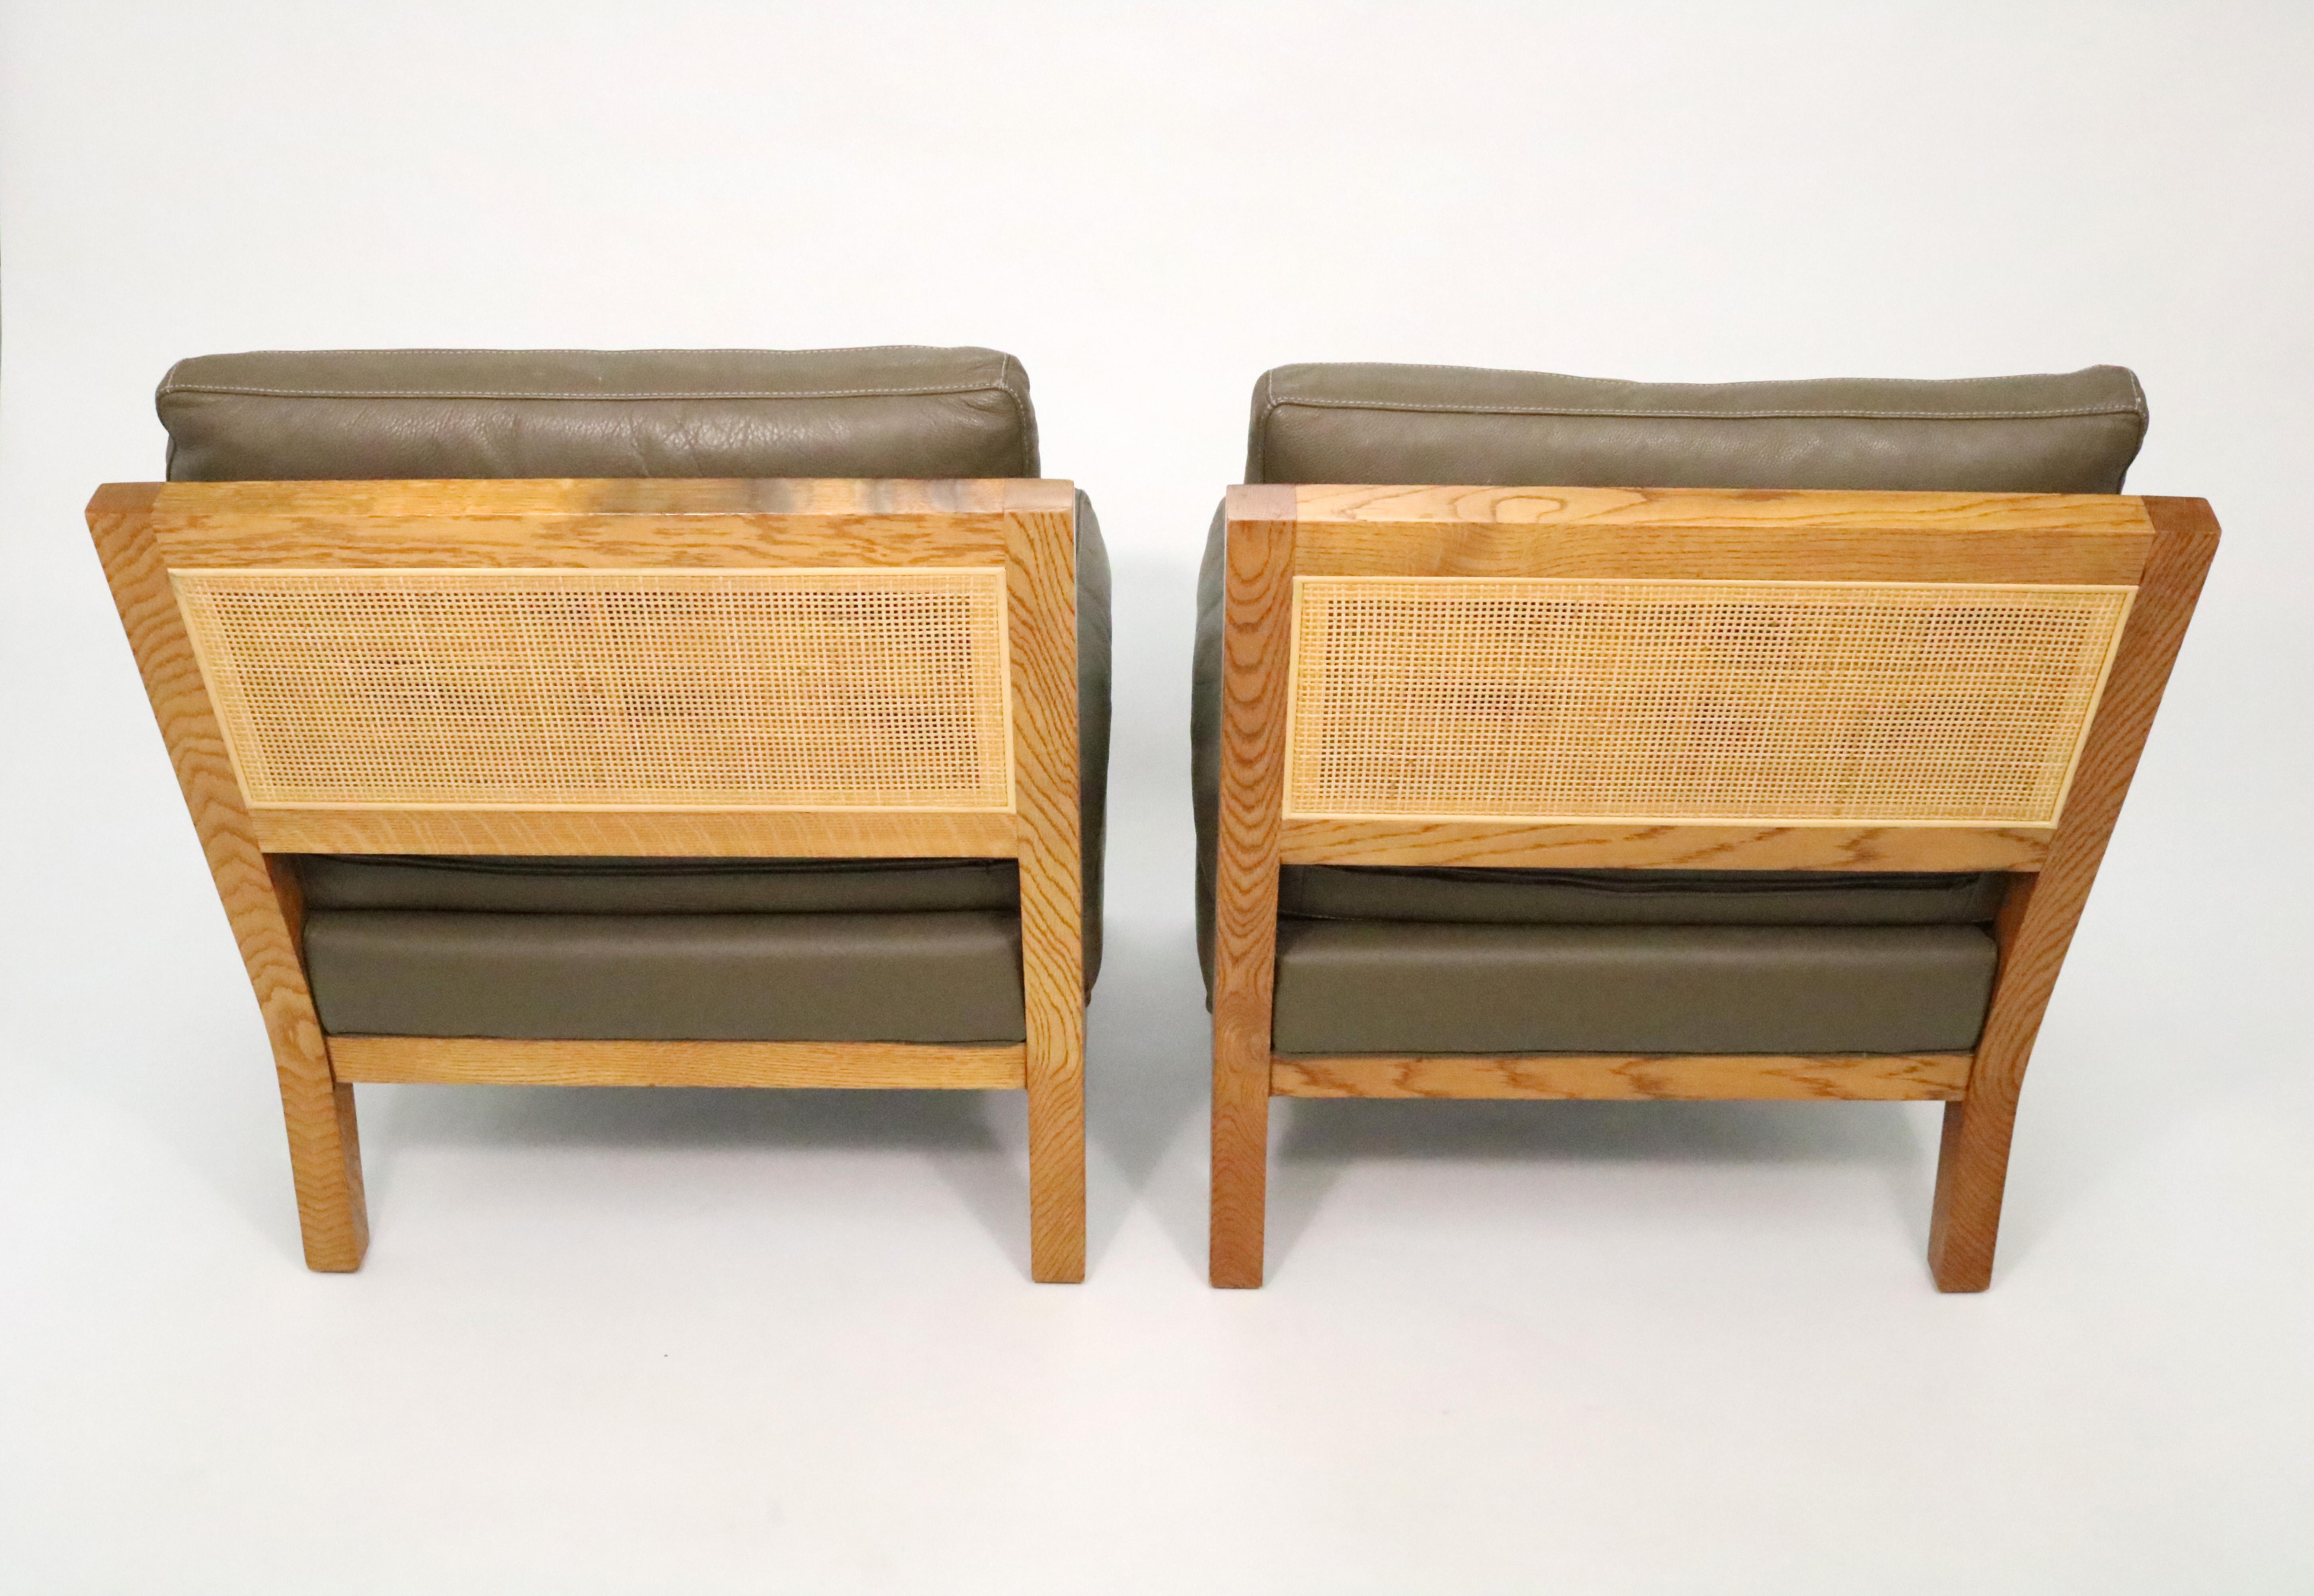 Handsome slipper chairs in leather and cane by Cisco Brothers' Habita Collection.